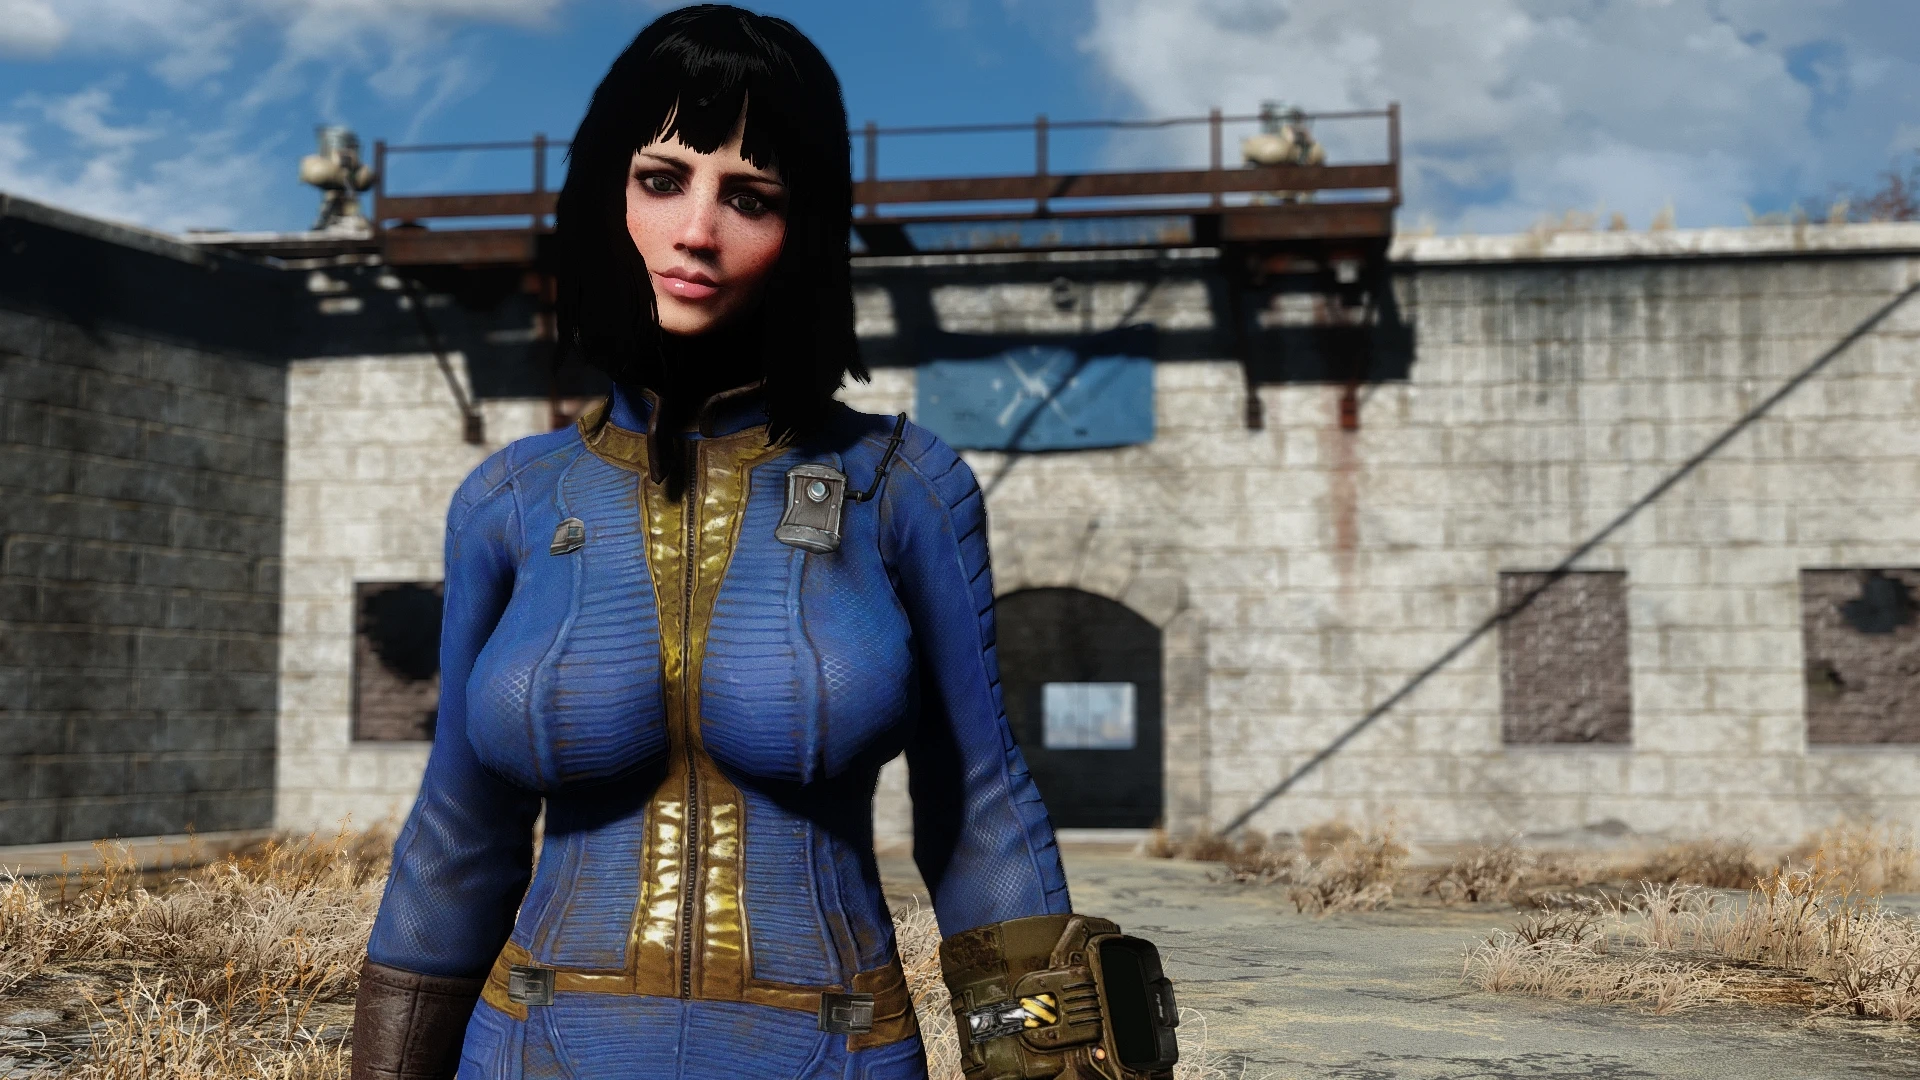 Vault Meat girl V2 0 at Fallout 4 Nexus Mods and community. www.nexusmods.c...